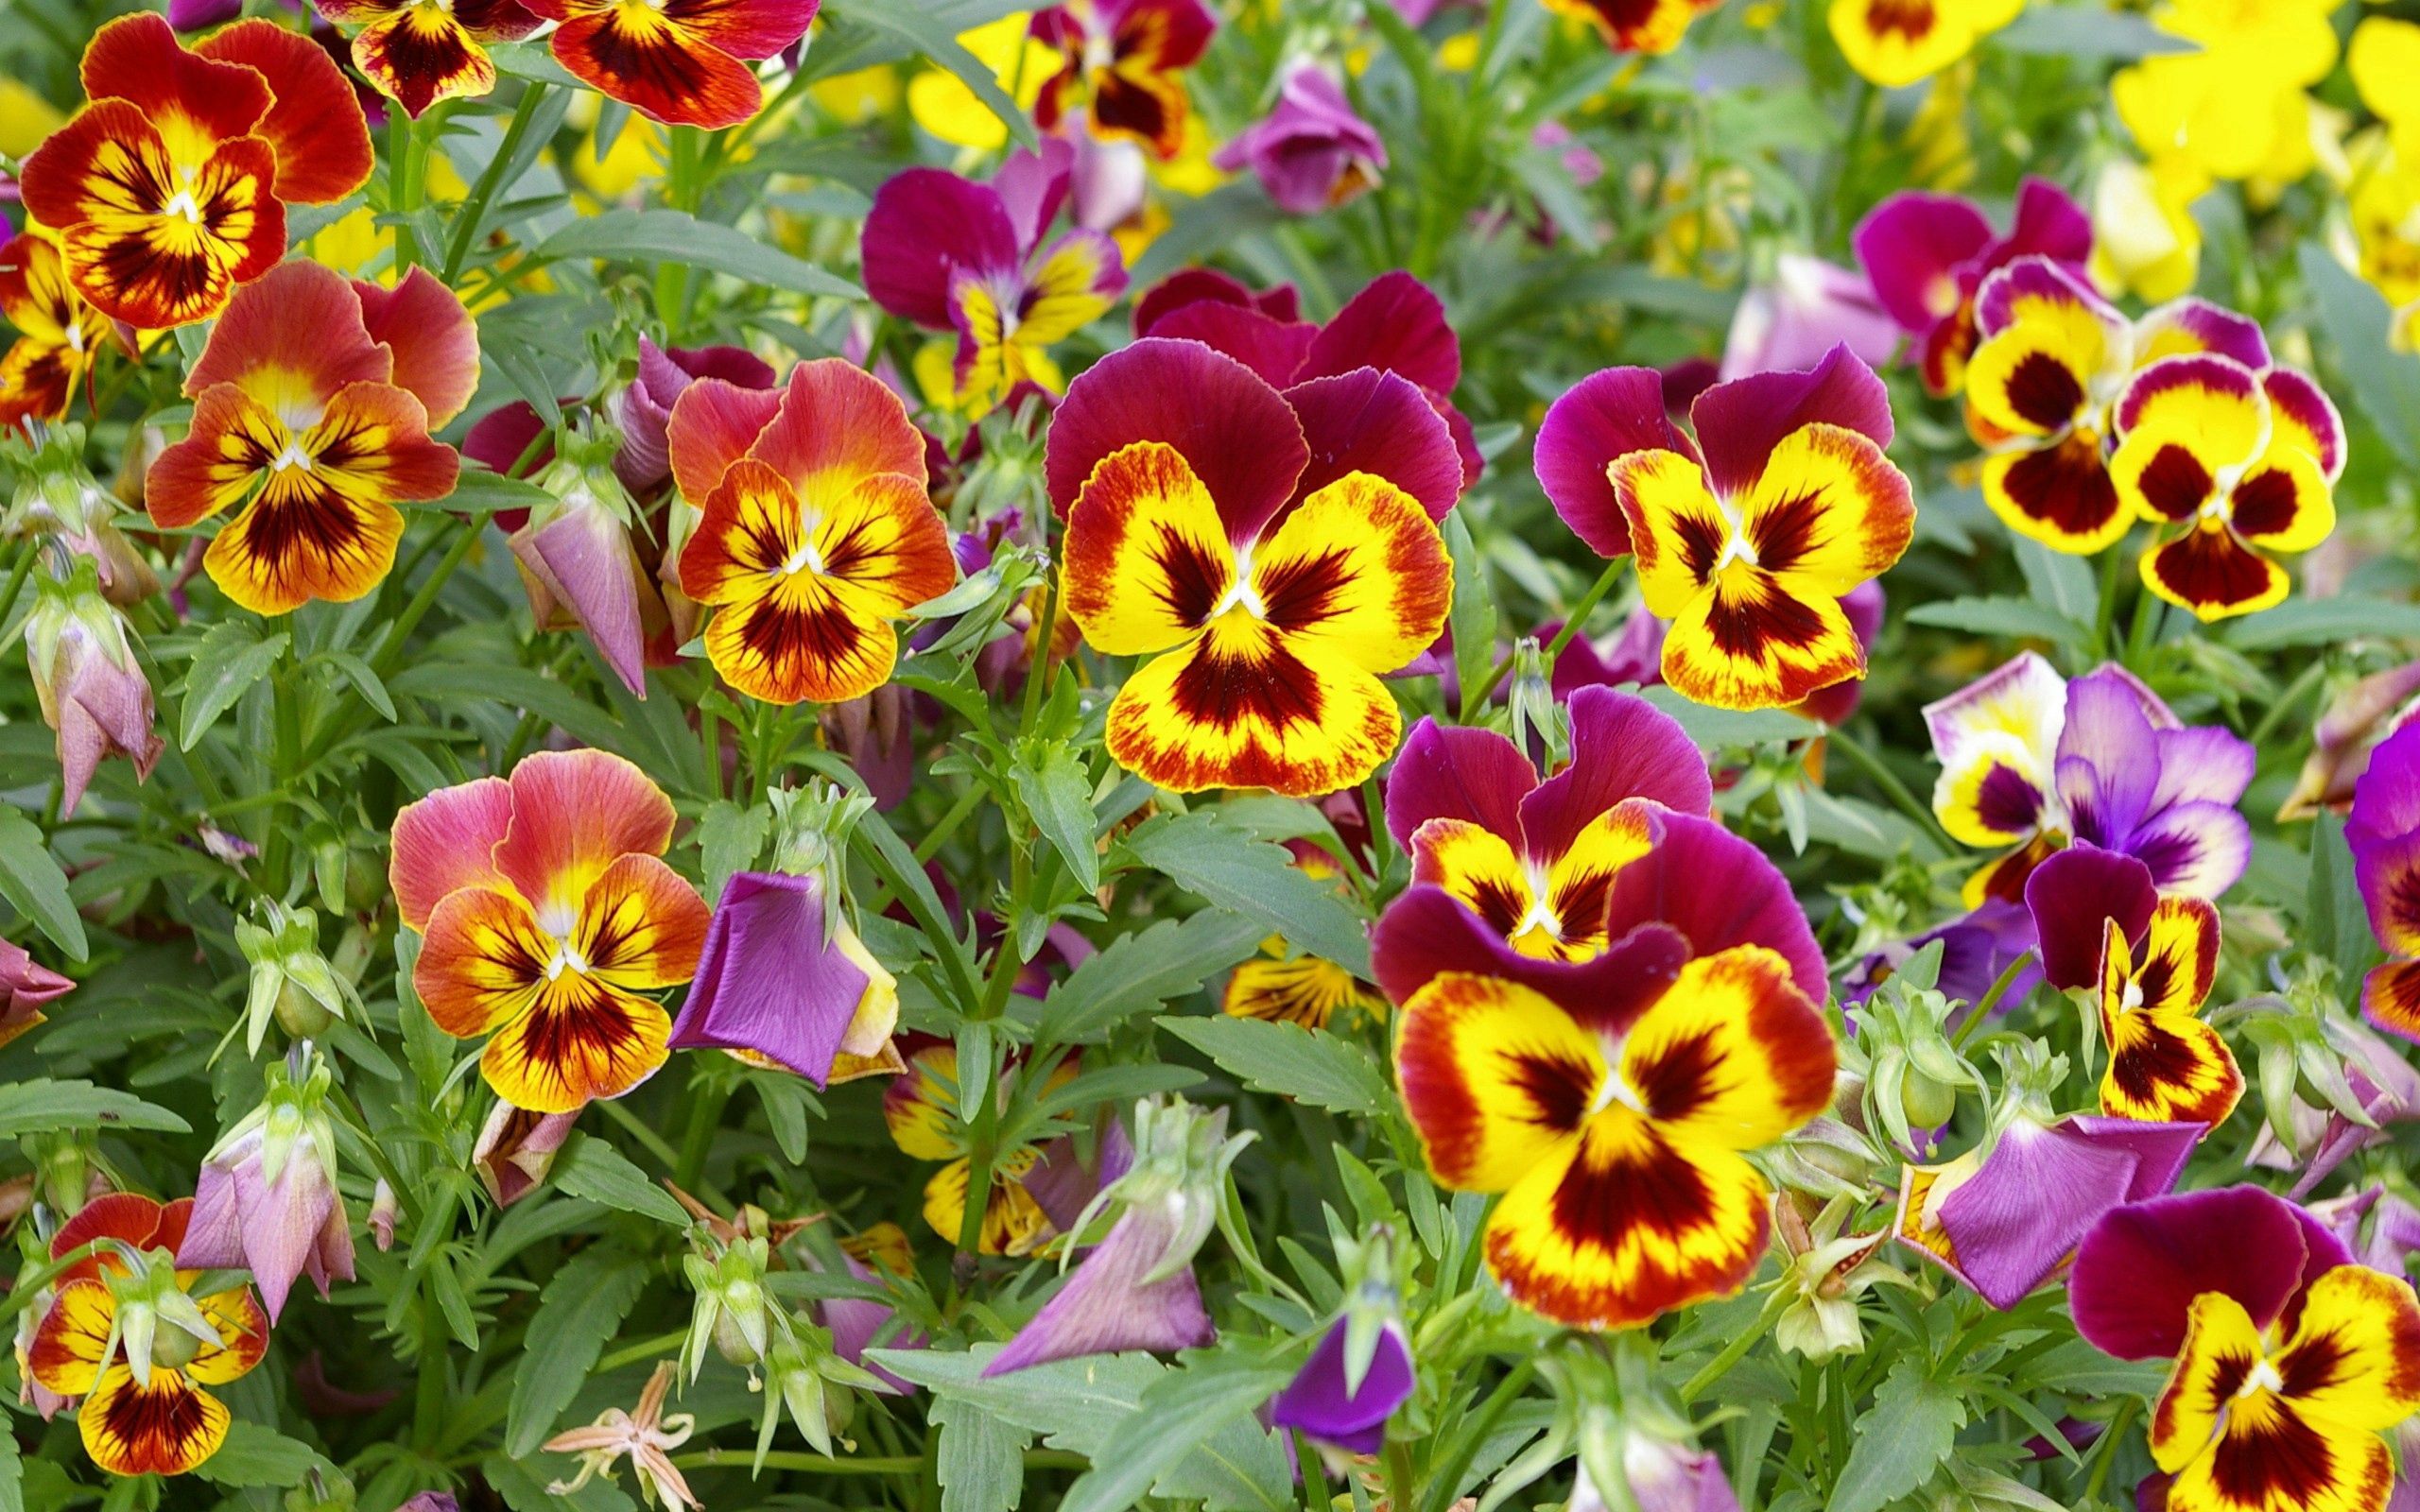 76611 download wallpaper flowers, pansies, bright, greens, flower bed, flowerbed screensavers and pictures for free